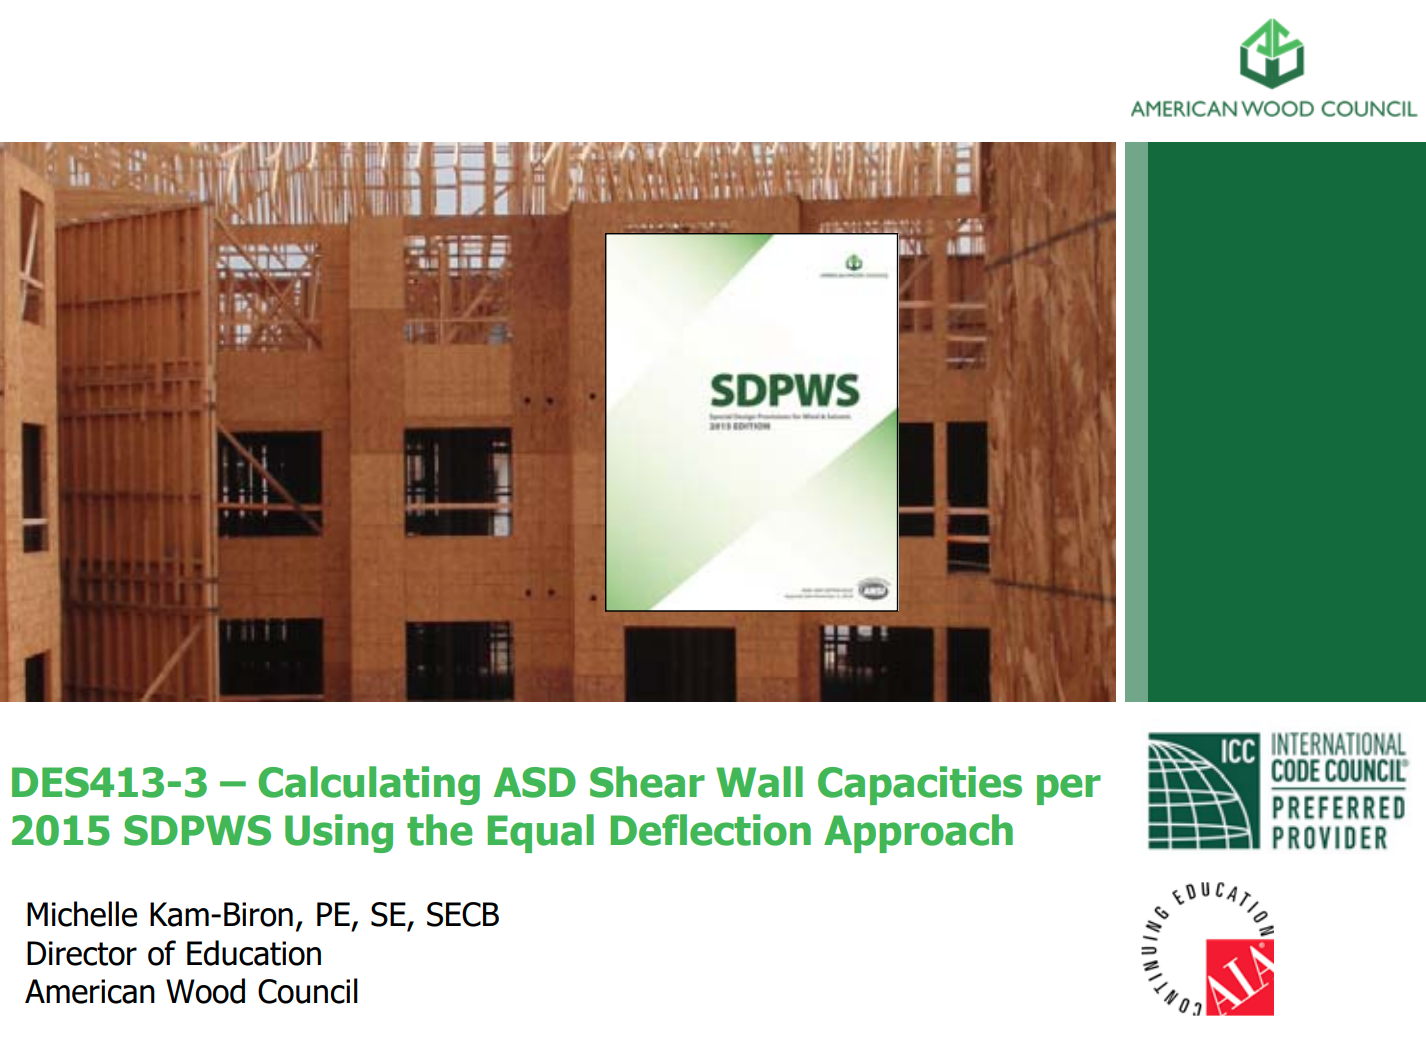 Calculating ASD Shear Wall Capacities per 2015 SDPWS Using the Equal Deflection Approach - DES413-3